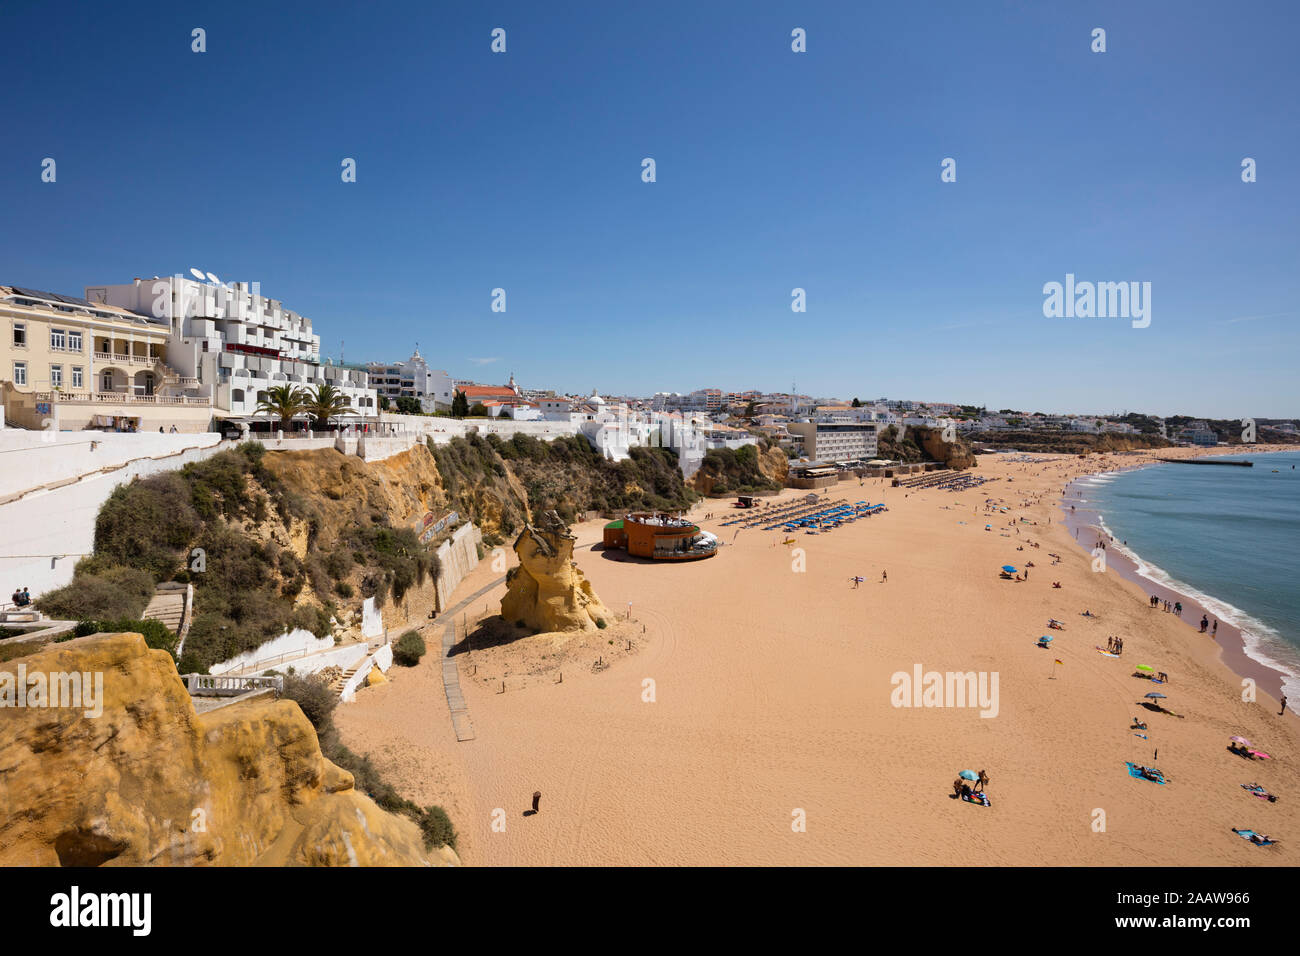 Scenic view of sandy beach against clear sky at Albufeira, Algarve, Portugal Stock Photo